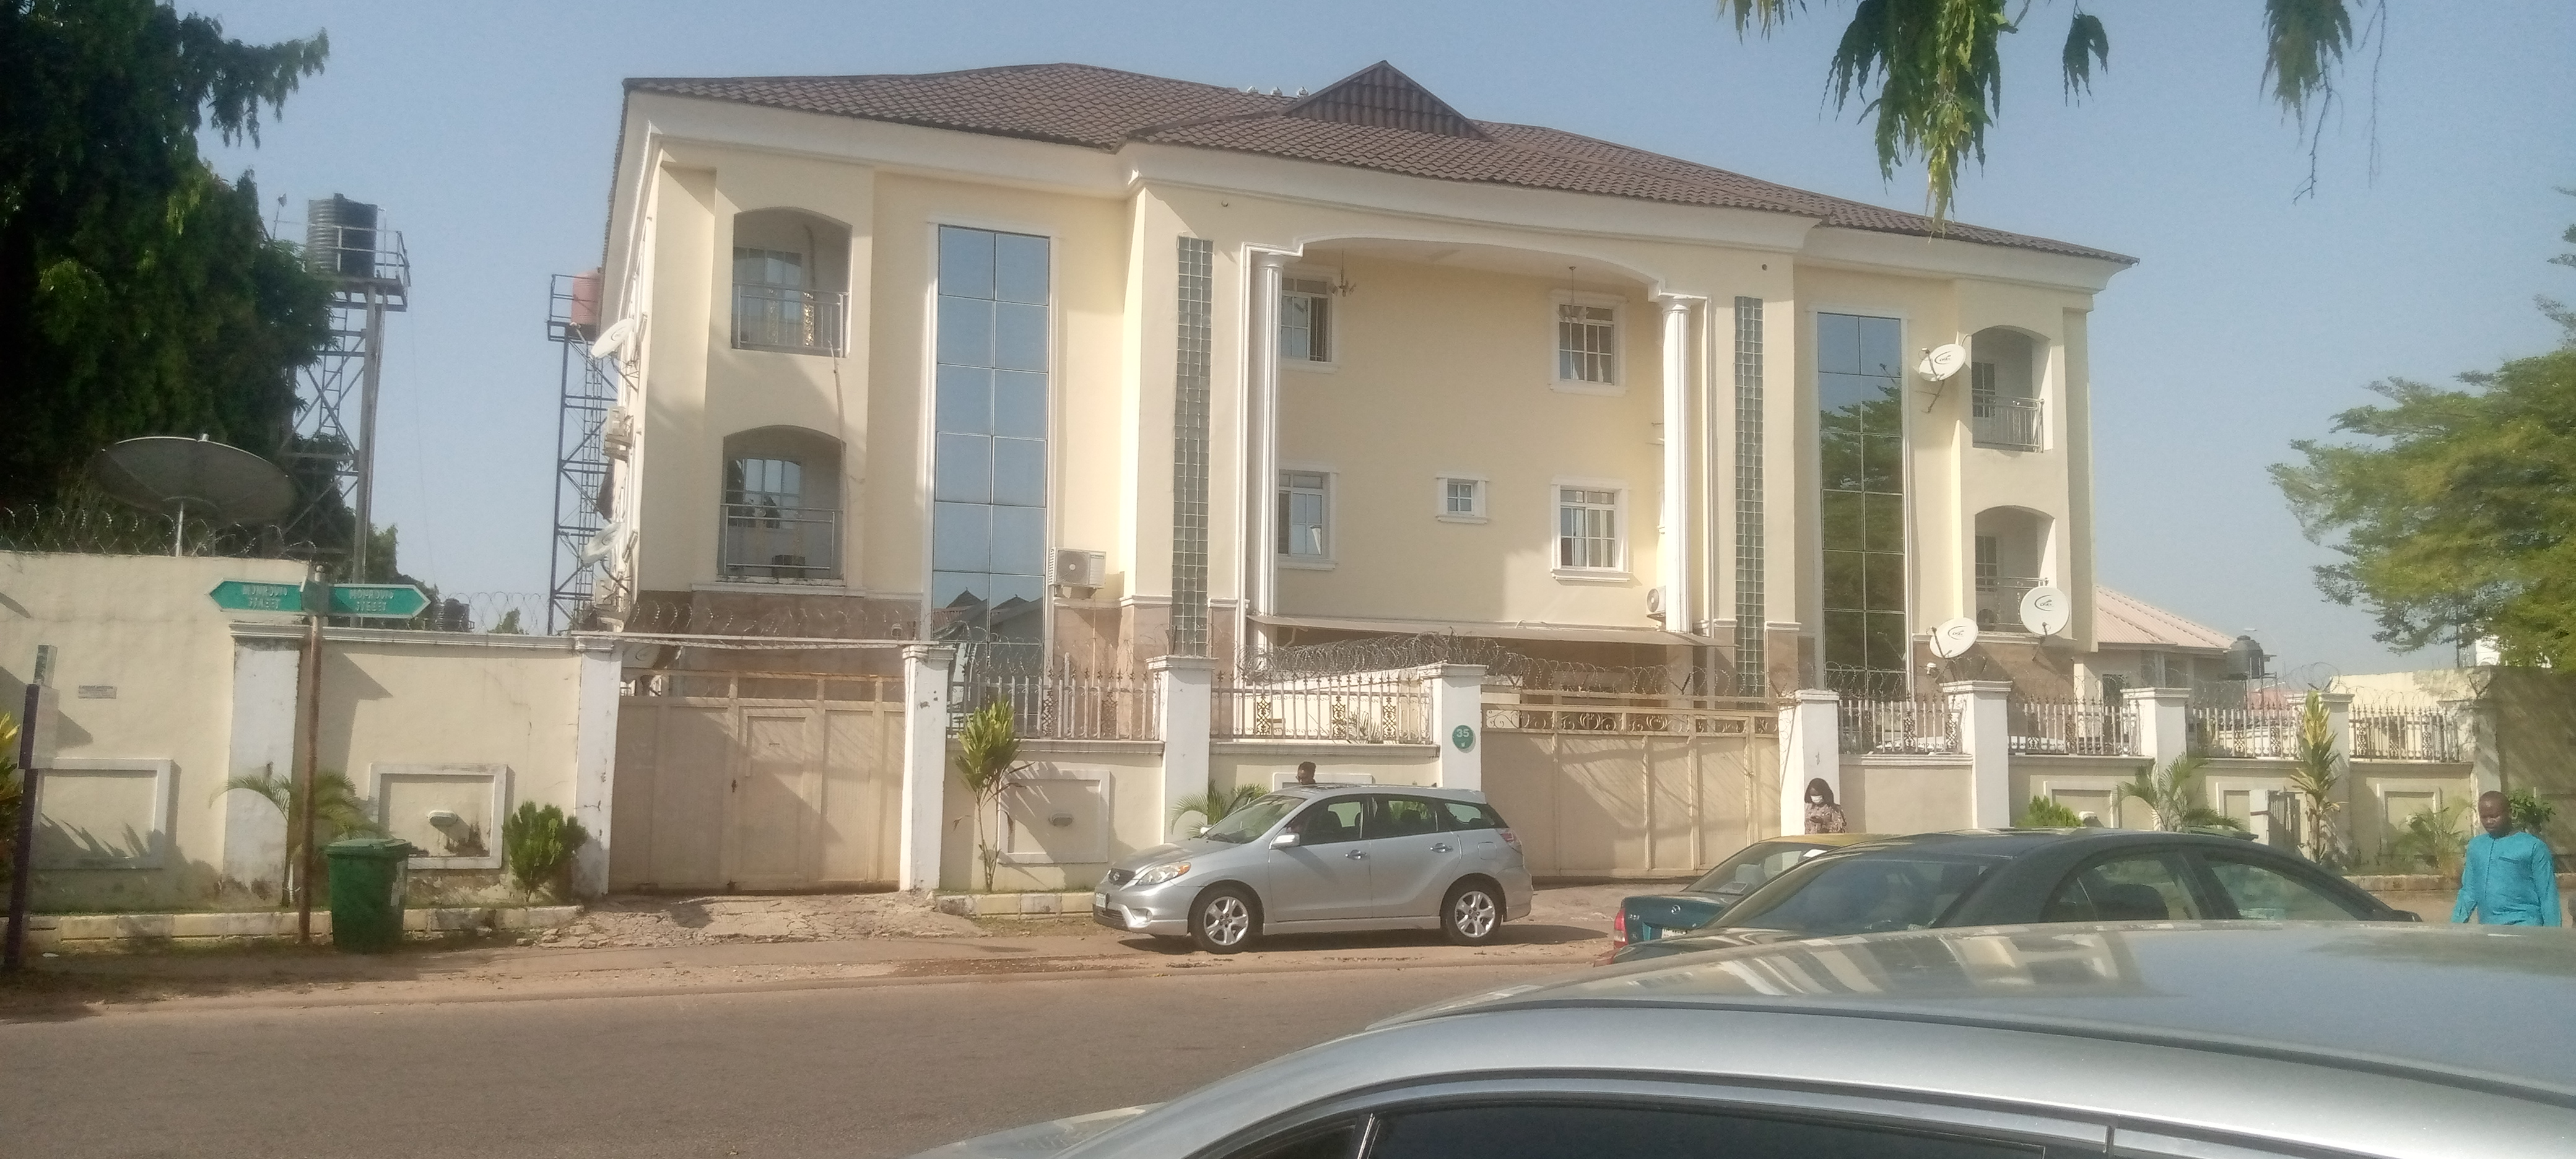 NOW LETTING FOR OFFICE USE: A Tastefully finished 6 Units of 3 Bedroom Flat on 3 floors+ Boy’s Quarters in a secured compound.